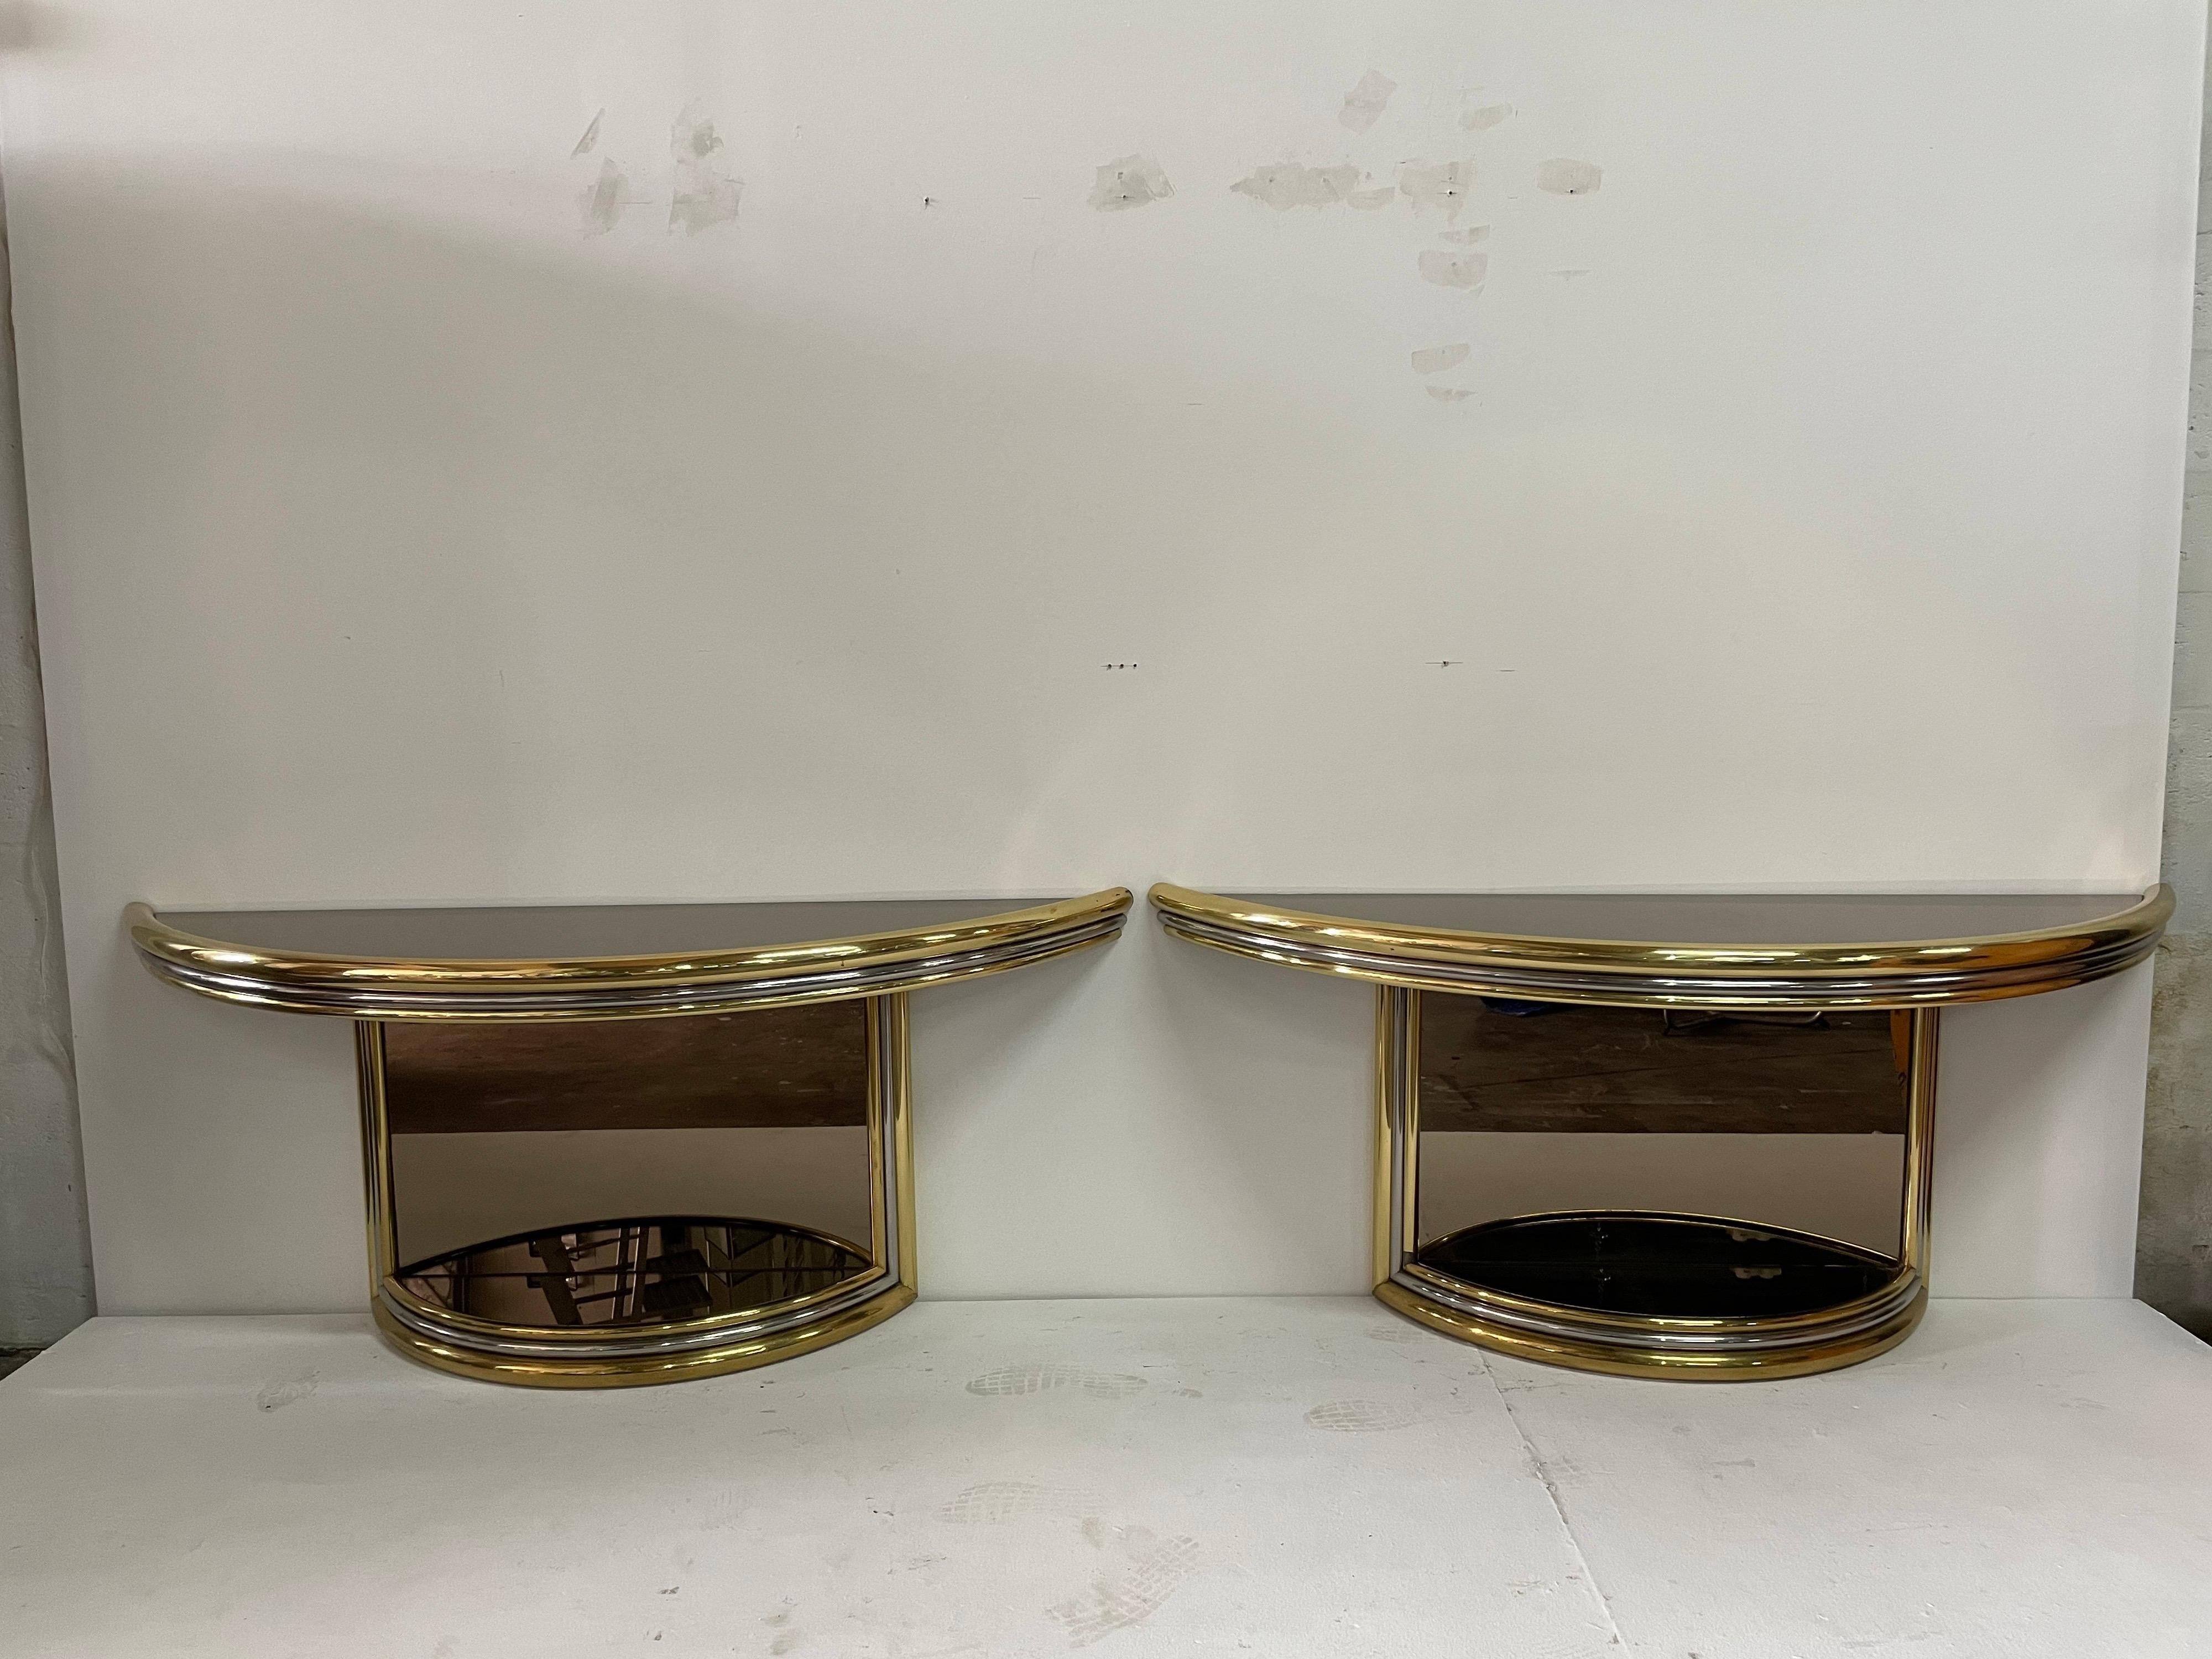 Exceptional Pair of Mixed-Metal Demilune Consoles For Sale 5